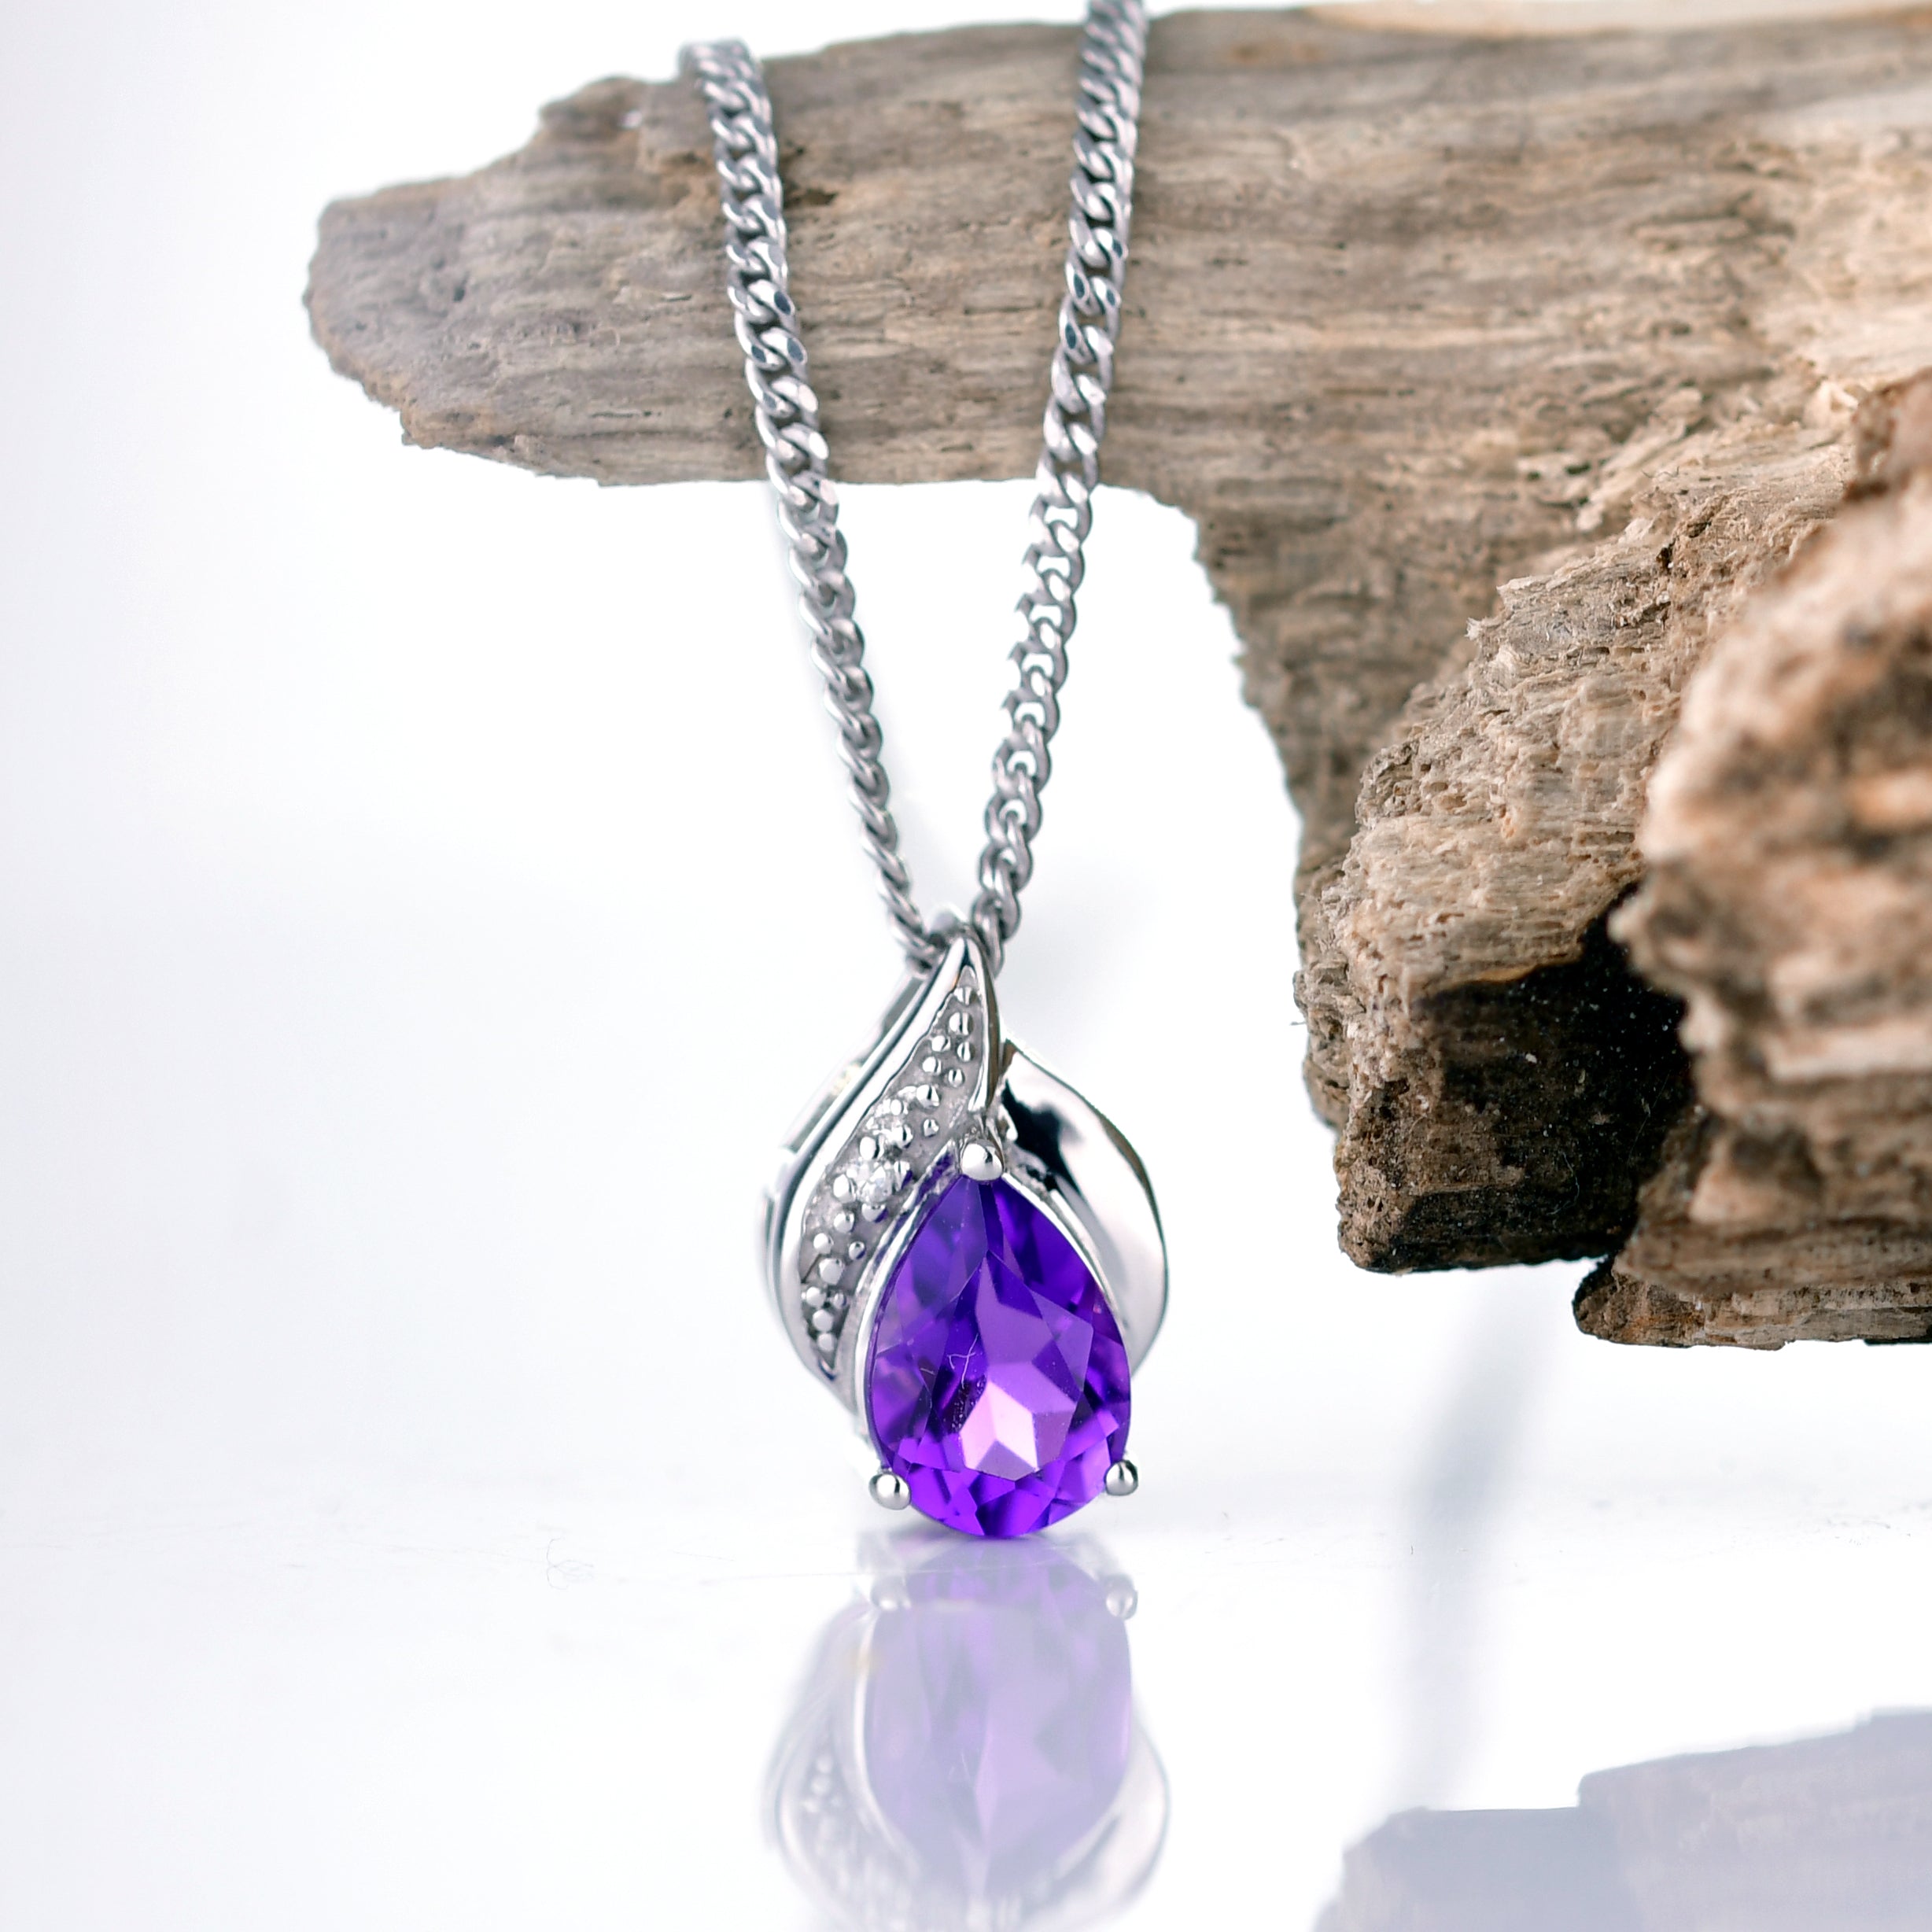 Handmade item Dispatches from a small business in India Necklace length: 16  Inches Materials: Silver, Stone, White gold Stone: Amethyst Closure: Slide  lock Chain style: Specialty chains Adjustable length Style: Minimalist  Recycled